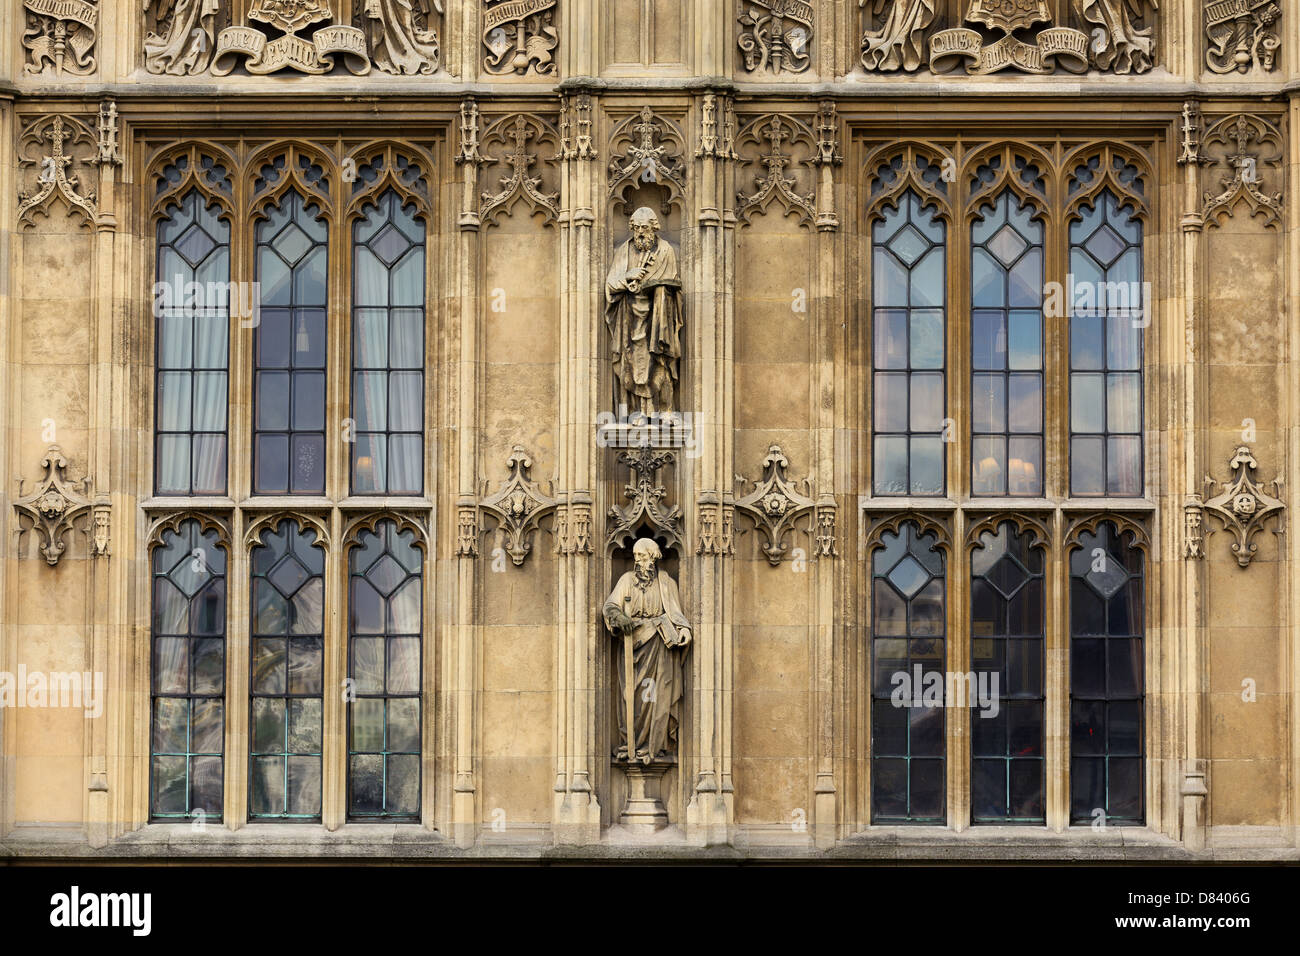 Palace of Westminster architecture details, London, United Kingdom Stock Photo